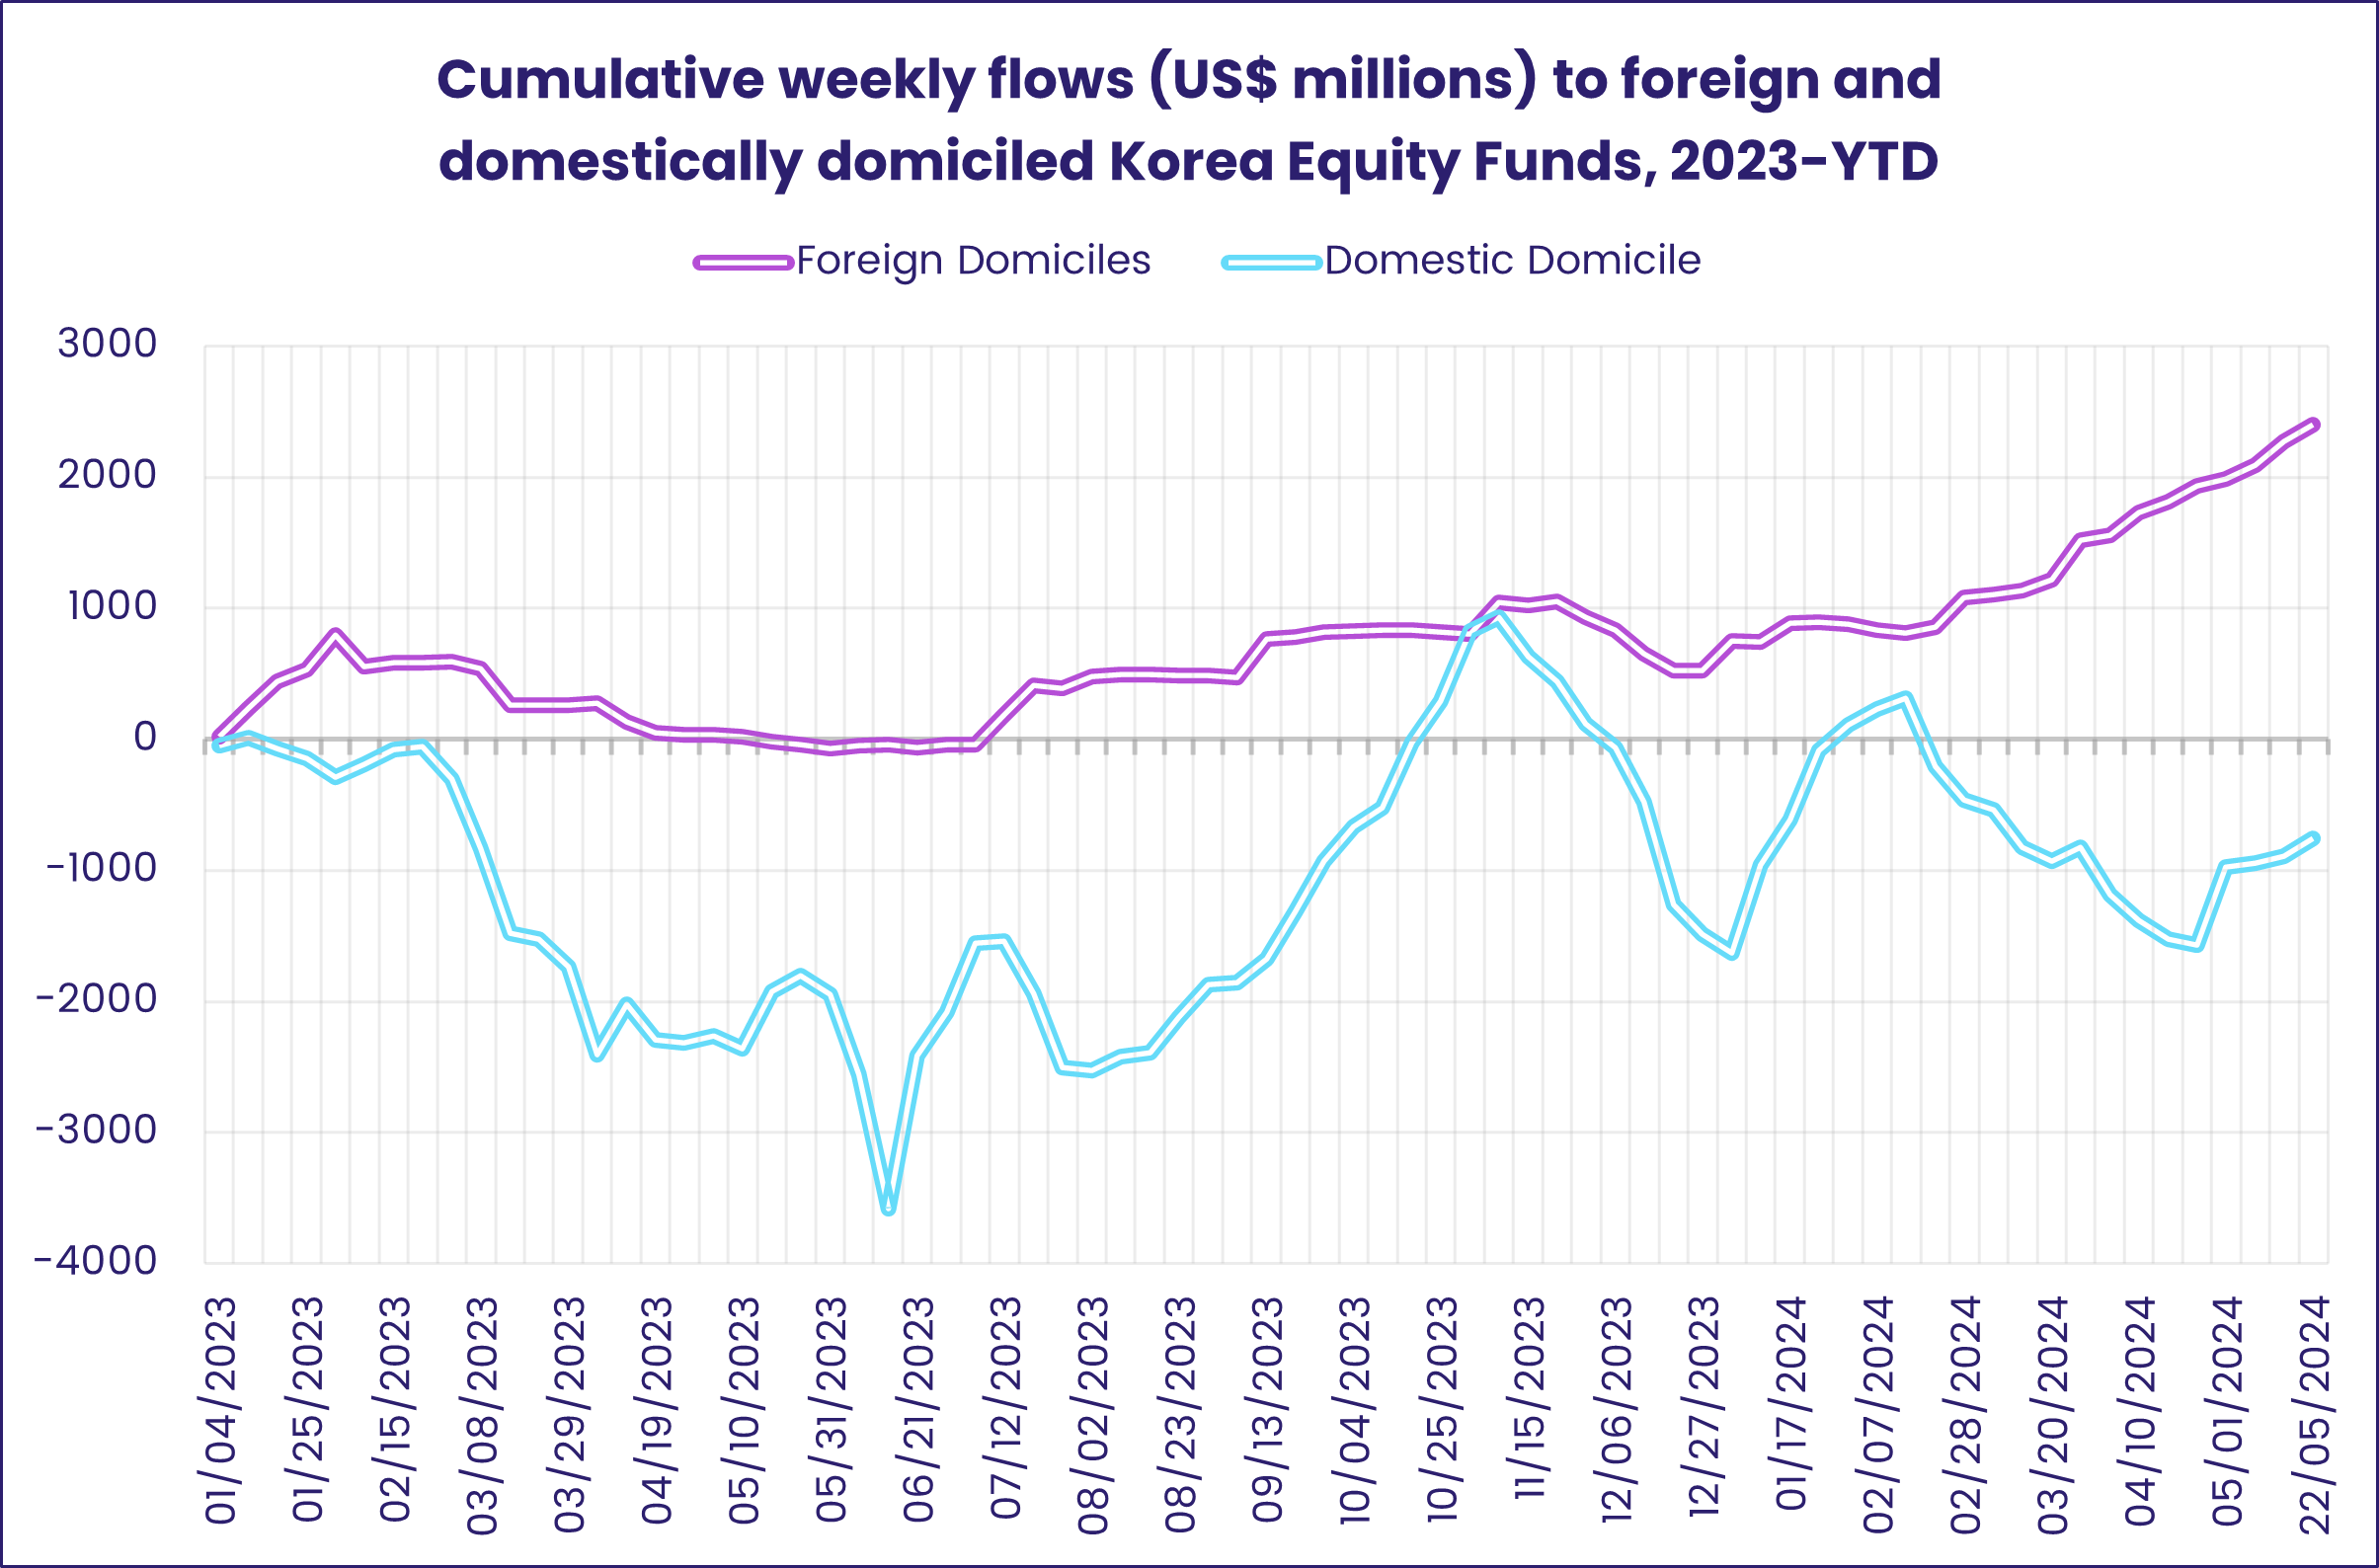 Chart representing 'Cumulative weekly flows (US$ millions) to foreign and domestically domiciled Korea Equity Funds, 2023-YTD'